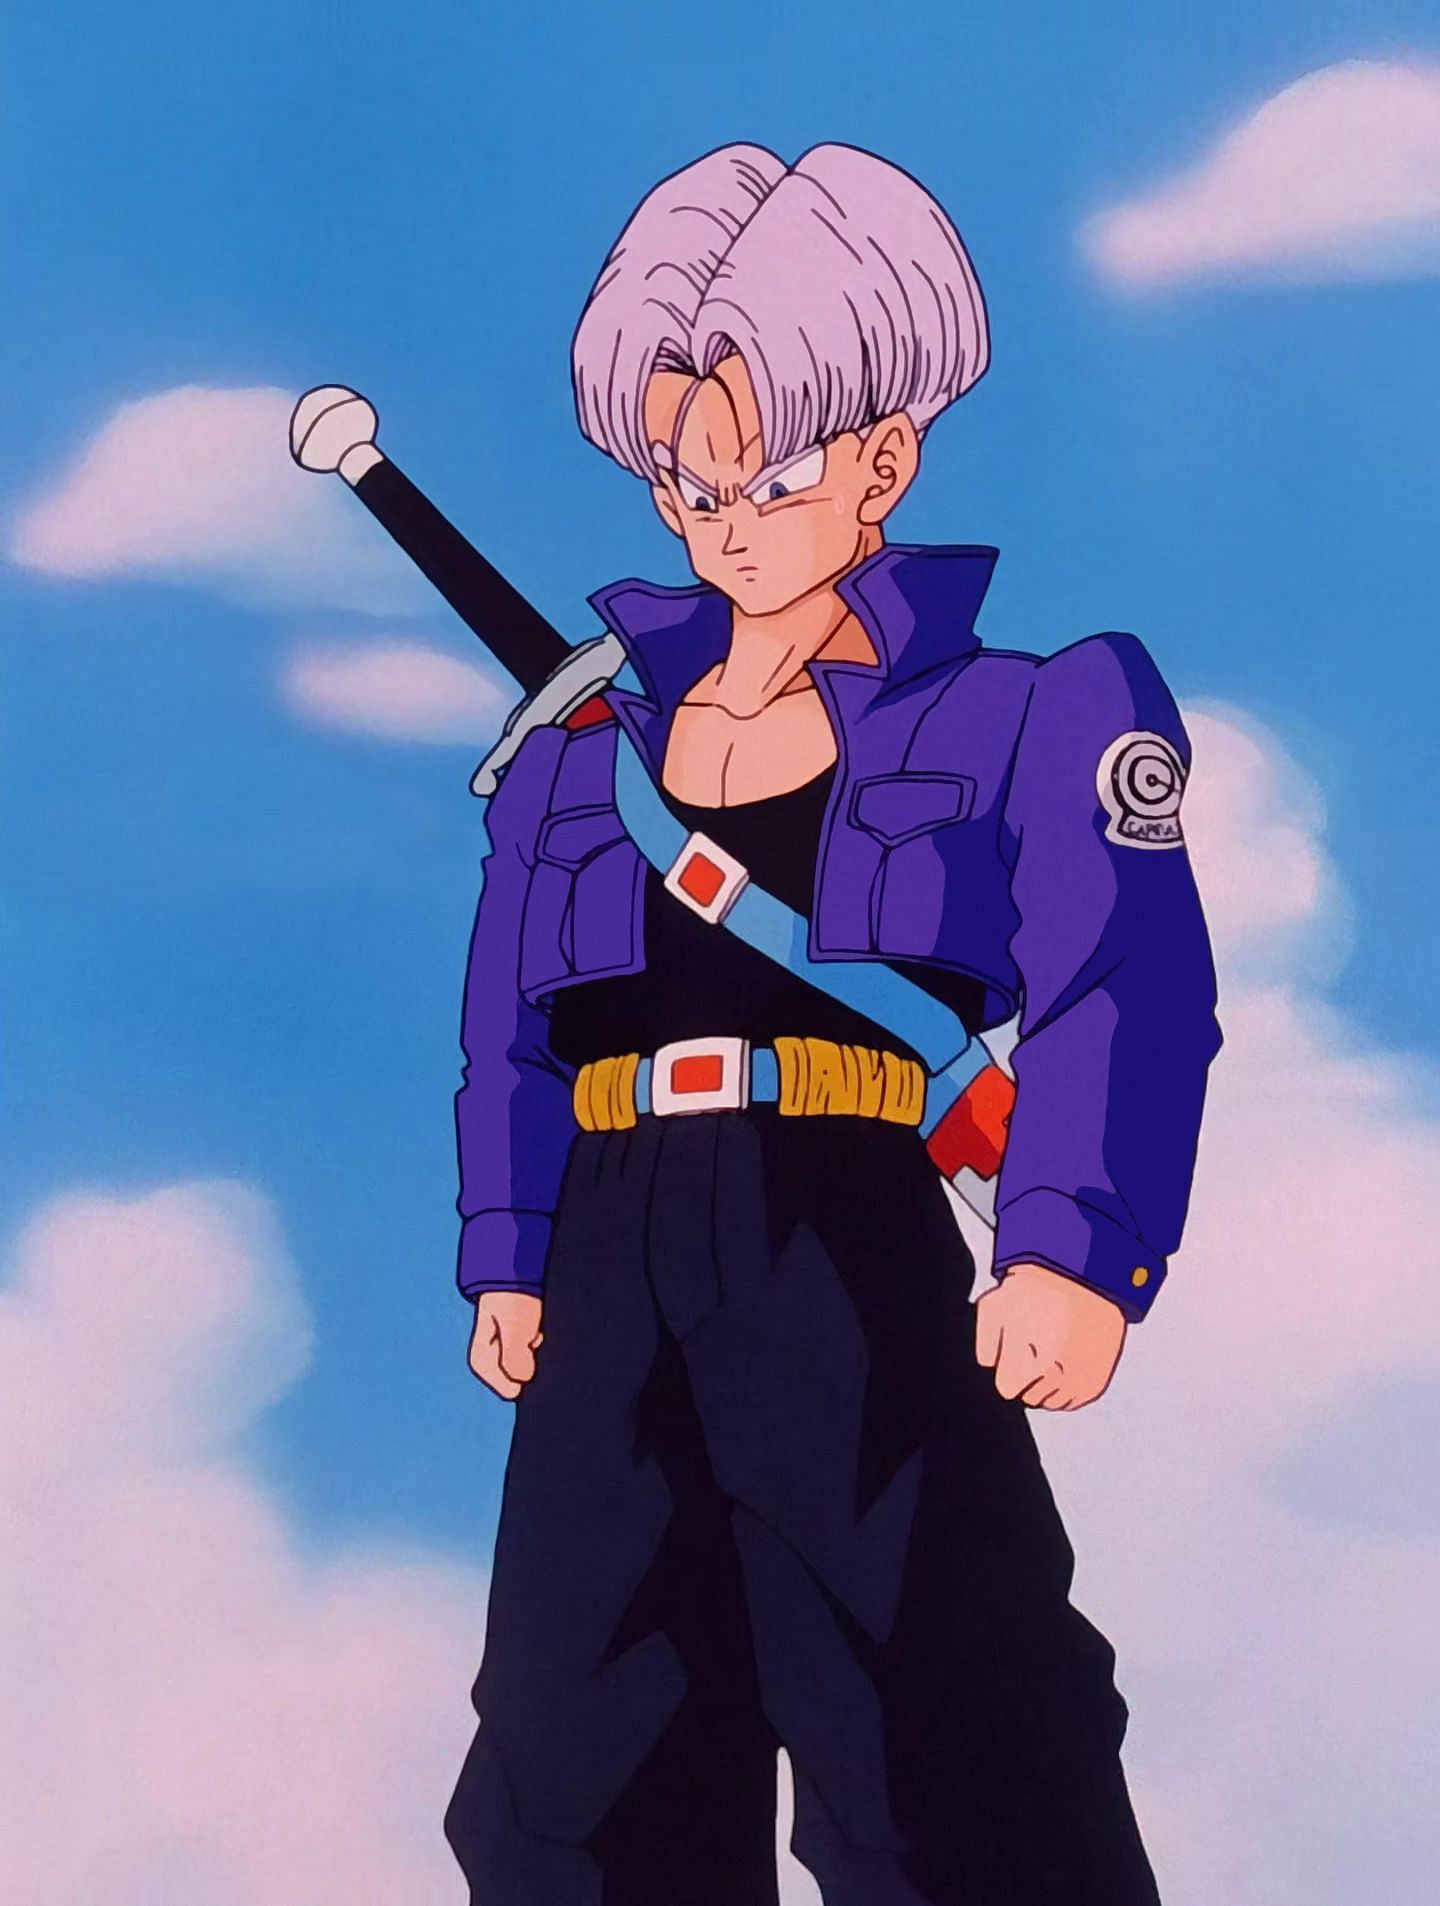 Future Trunks as seen in his Dragon Ball Z debut. (Image via Toei Animation)